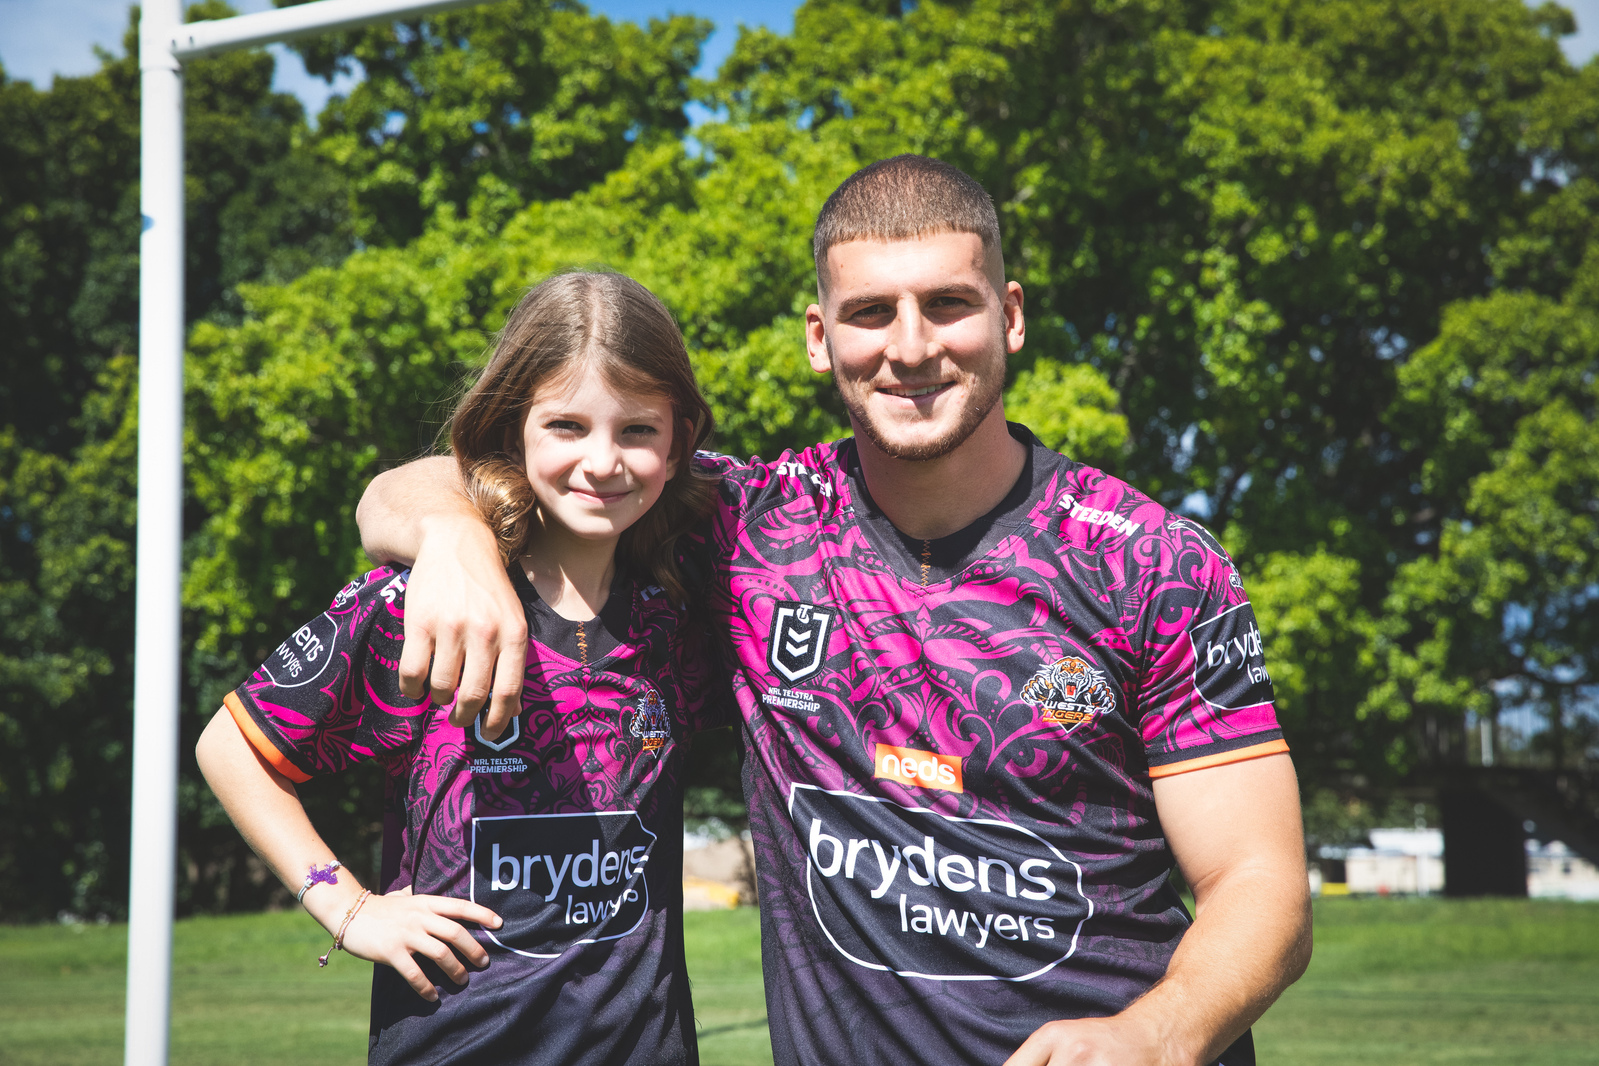 Wests Tigers NRL 2021 Steeden WIL Women in League Jersey Adults Sizes S-7XL!